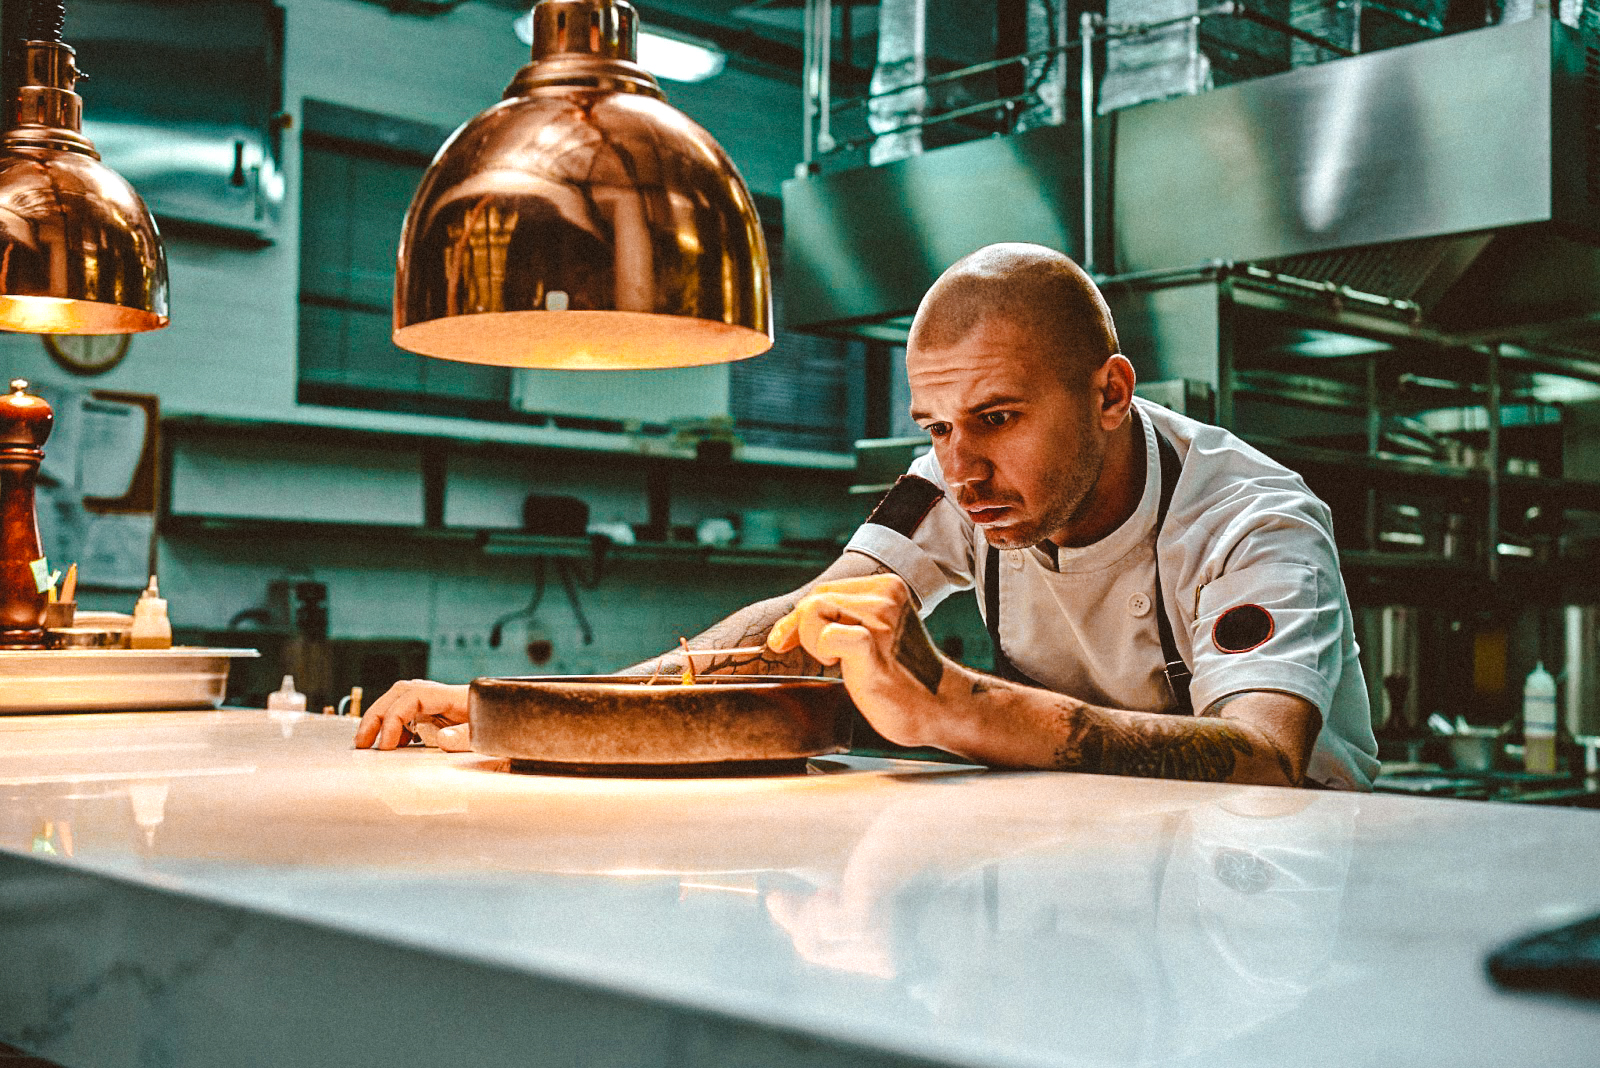 How to Fight the Epidemic of Chef Burnout